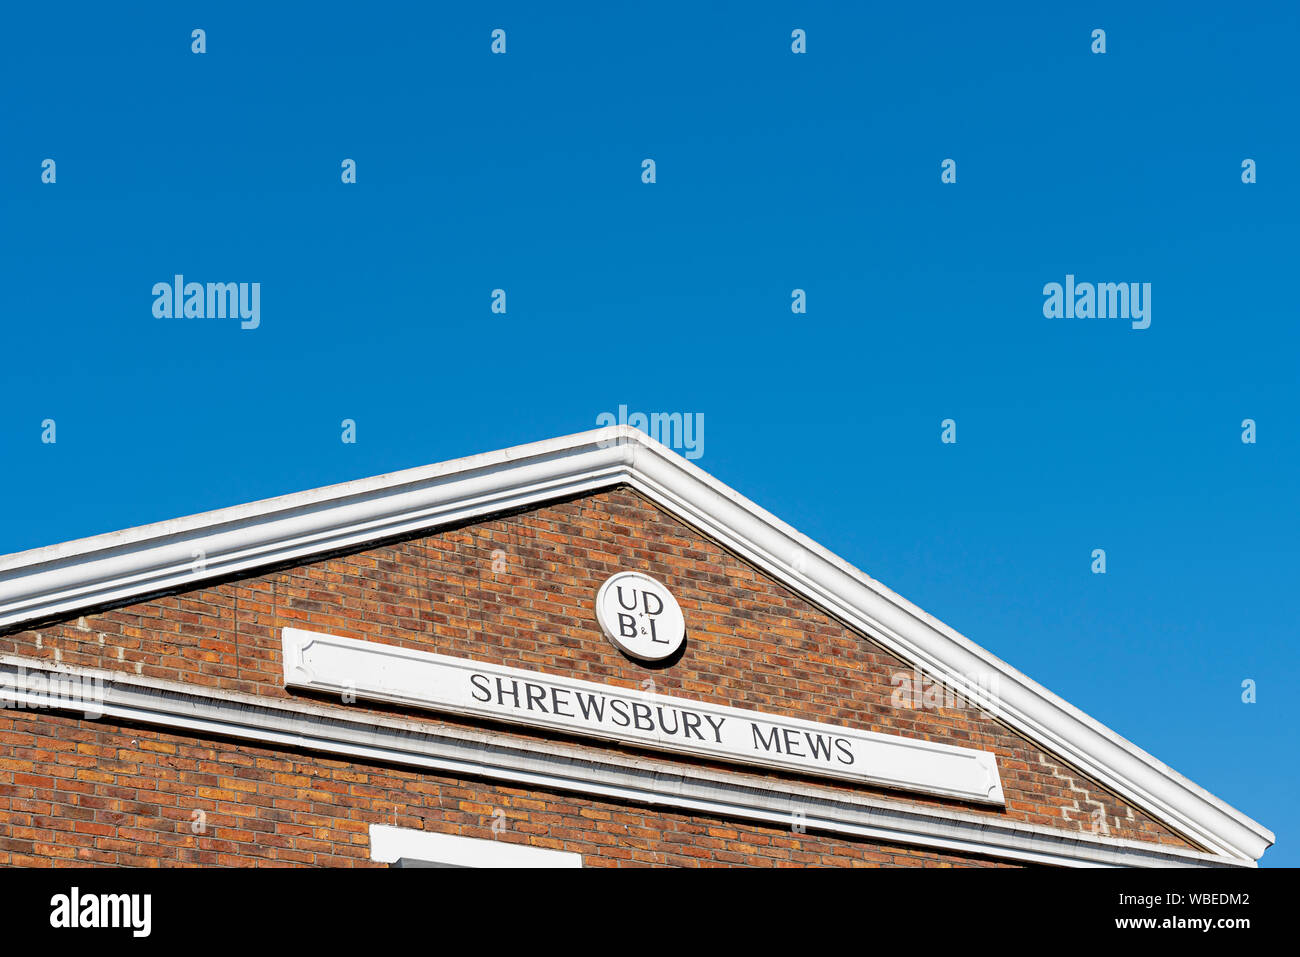 Shrewsbury Mews, Notting Hill, London W2. Property building decoration sign. UD B&L. Blue sky. Space for copy Stock Photo